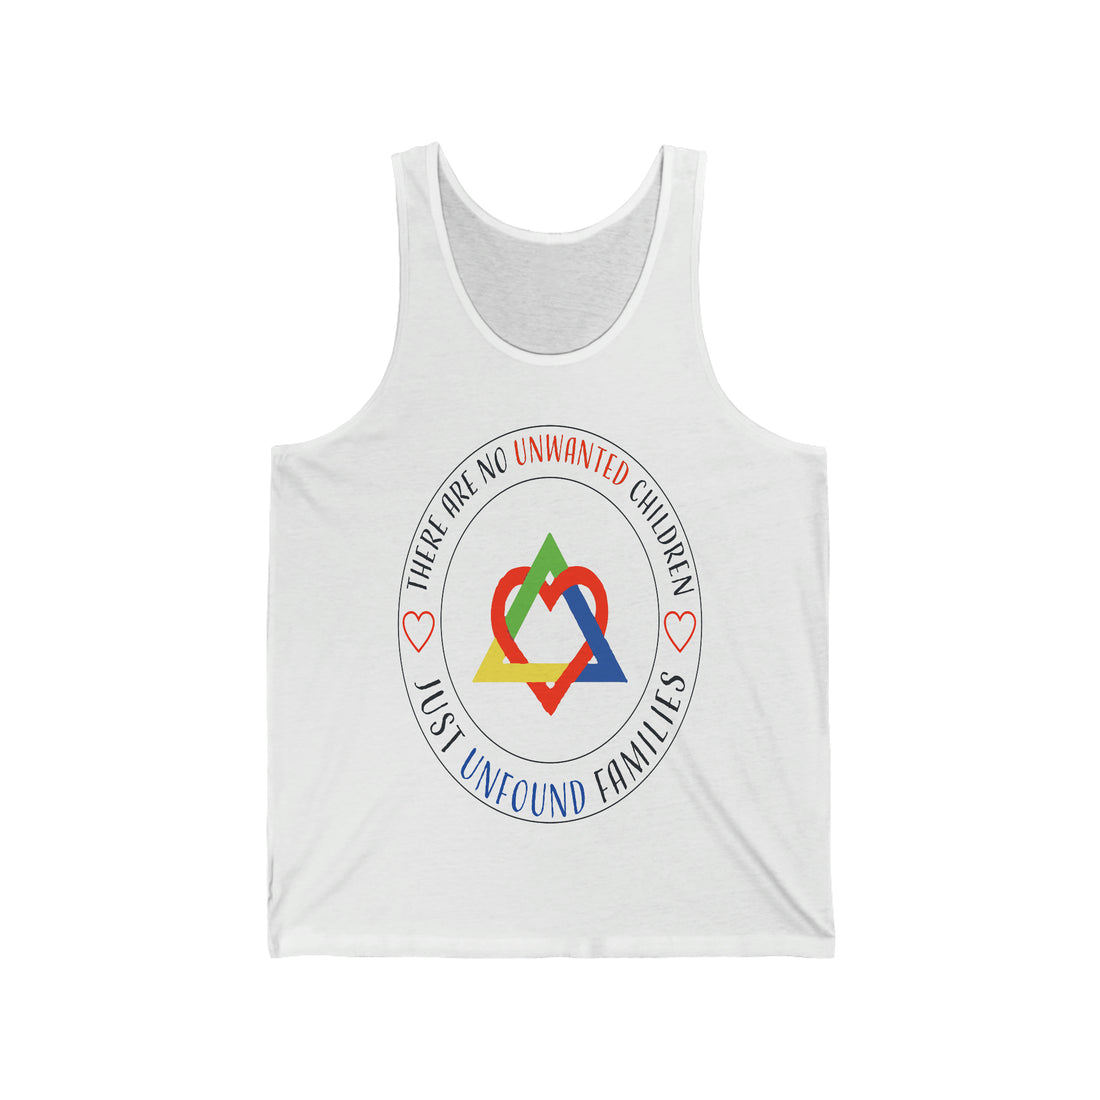 There Are No Unwanted Children Only Unfound Families - Unisex Jersey Tank Top